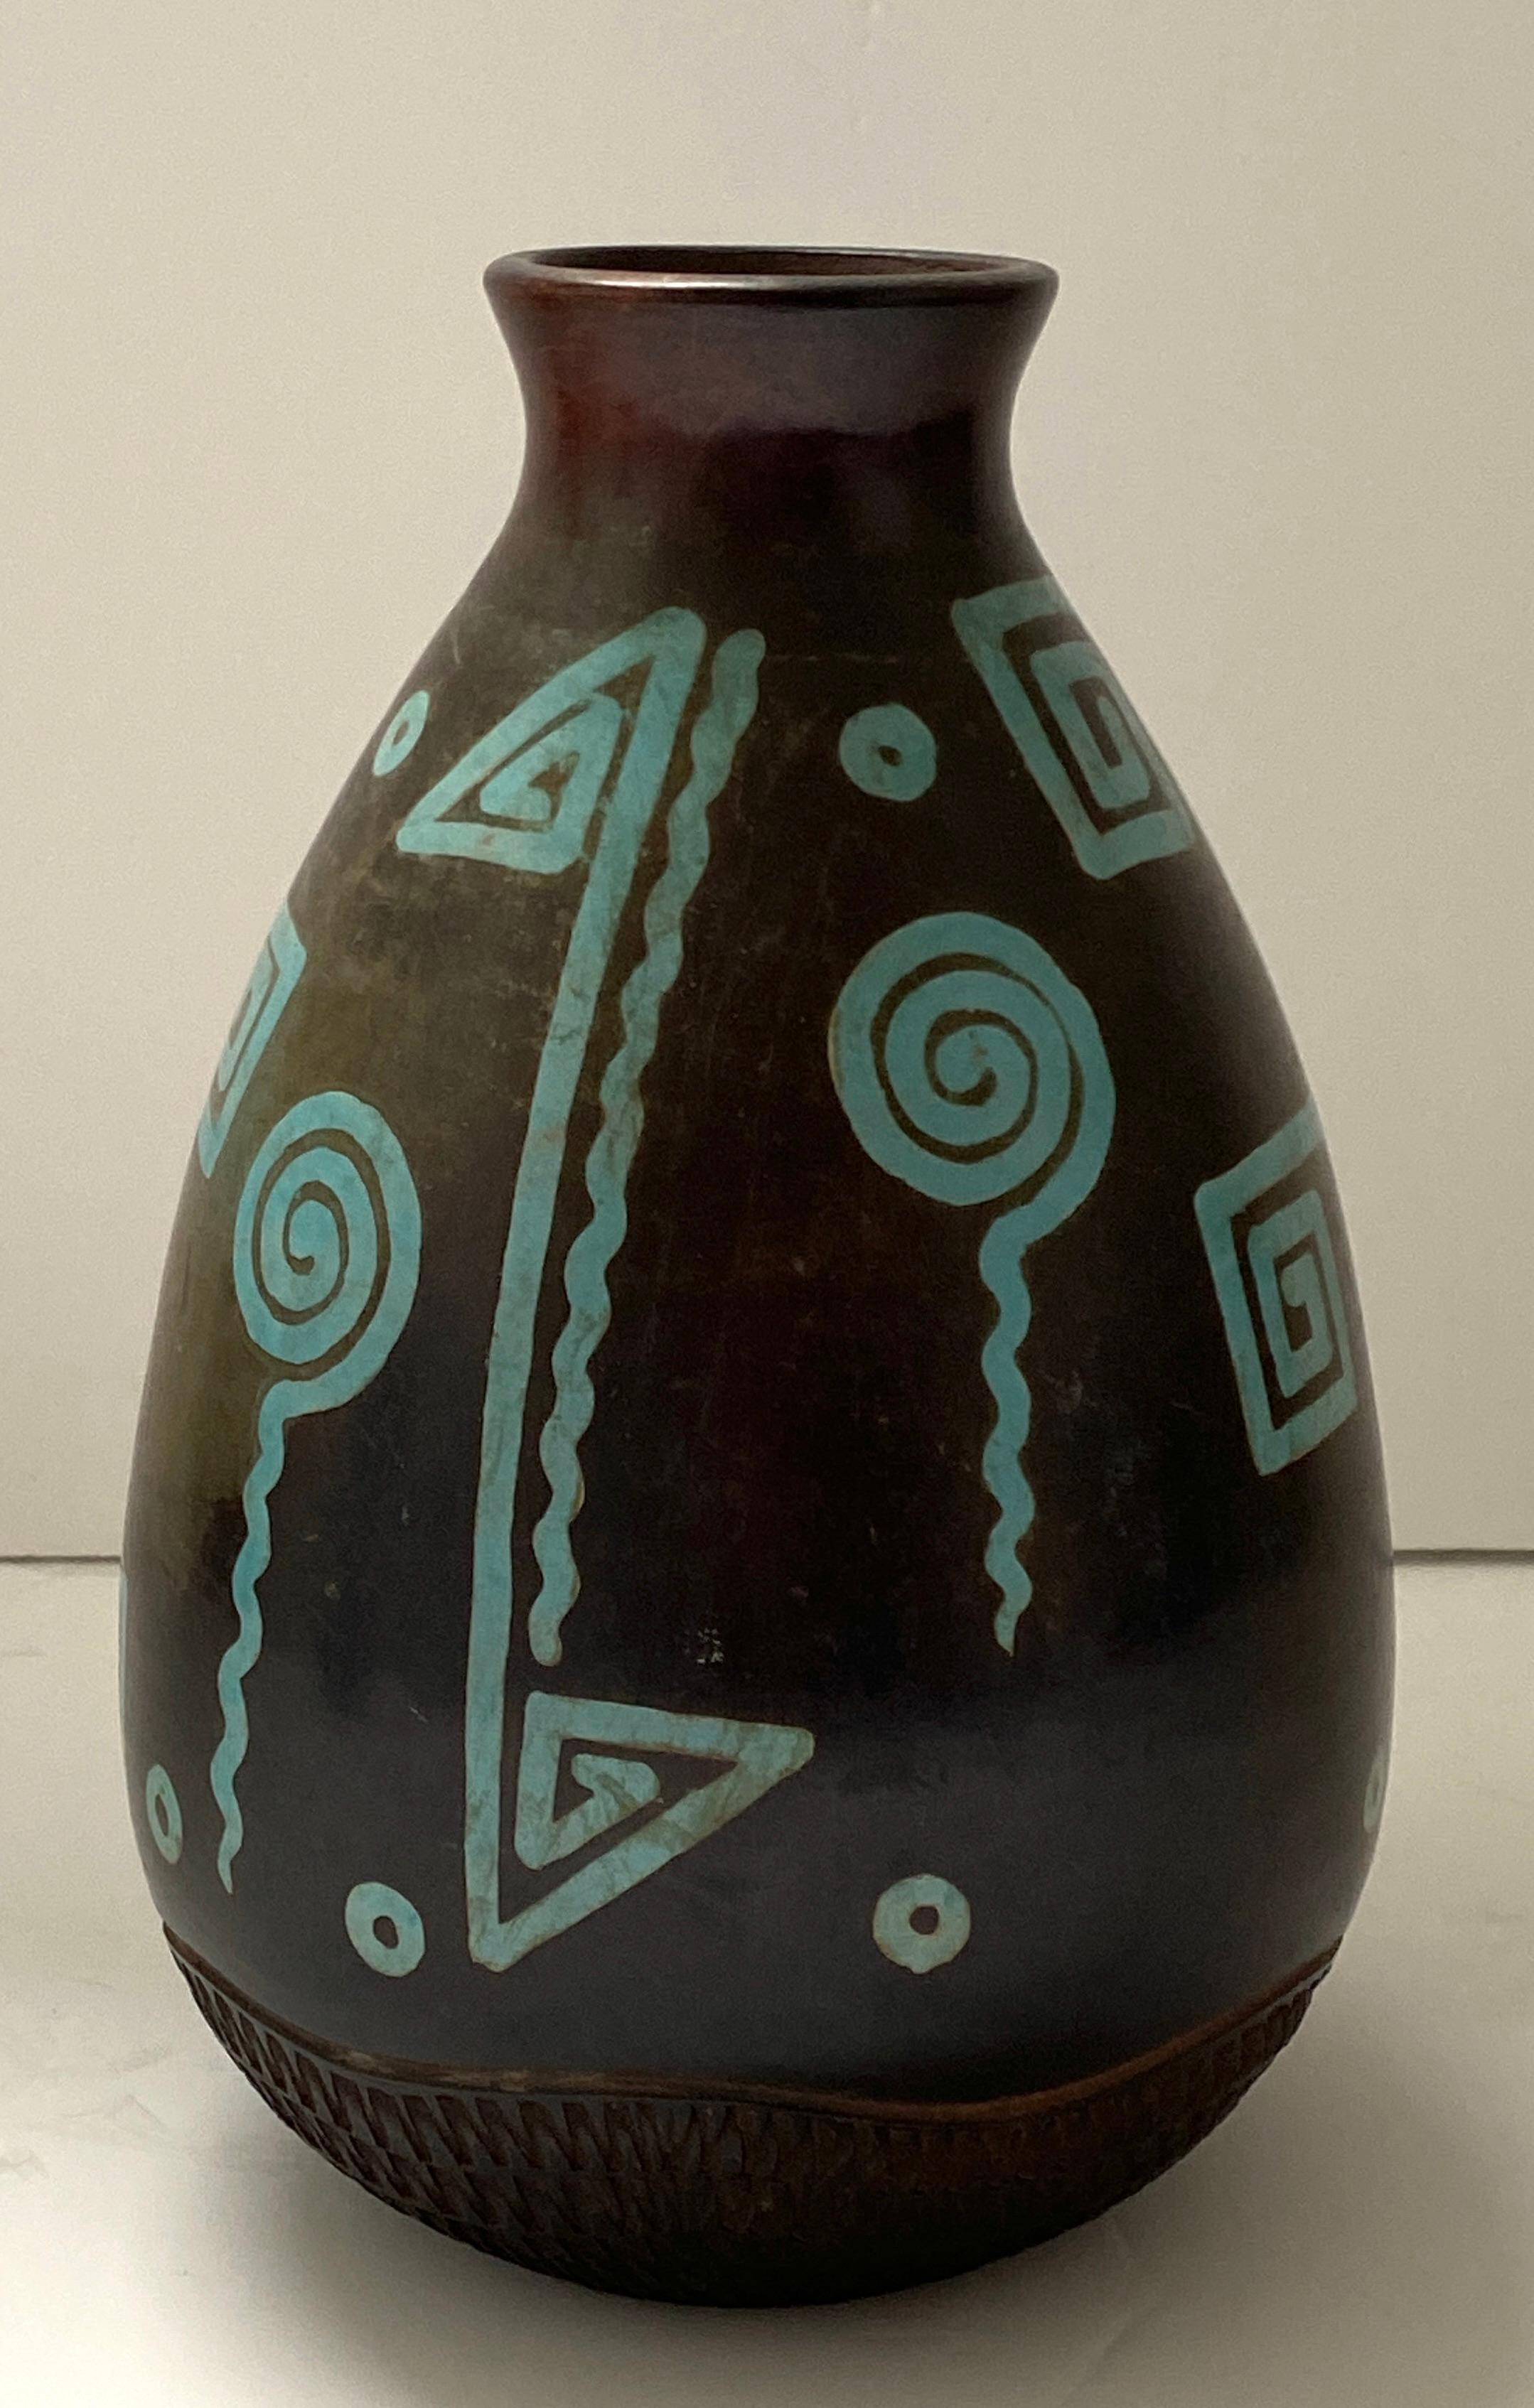 20th Century Native American Comtemporary Pottery Vase by V Ittery